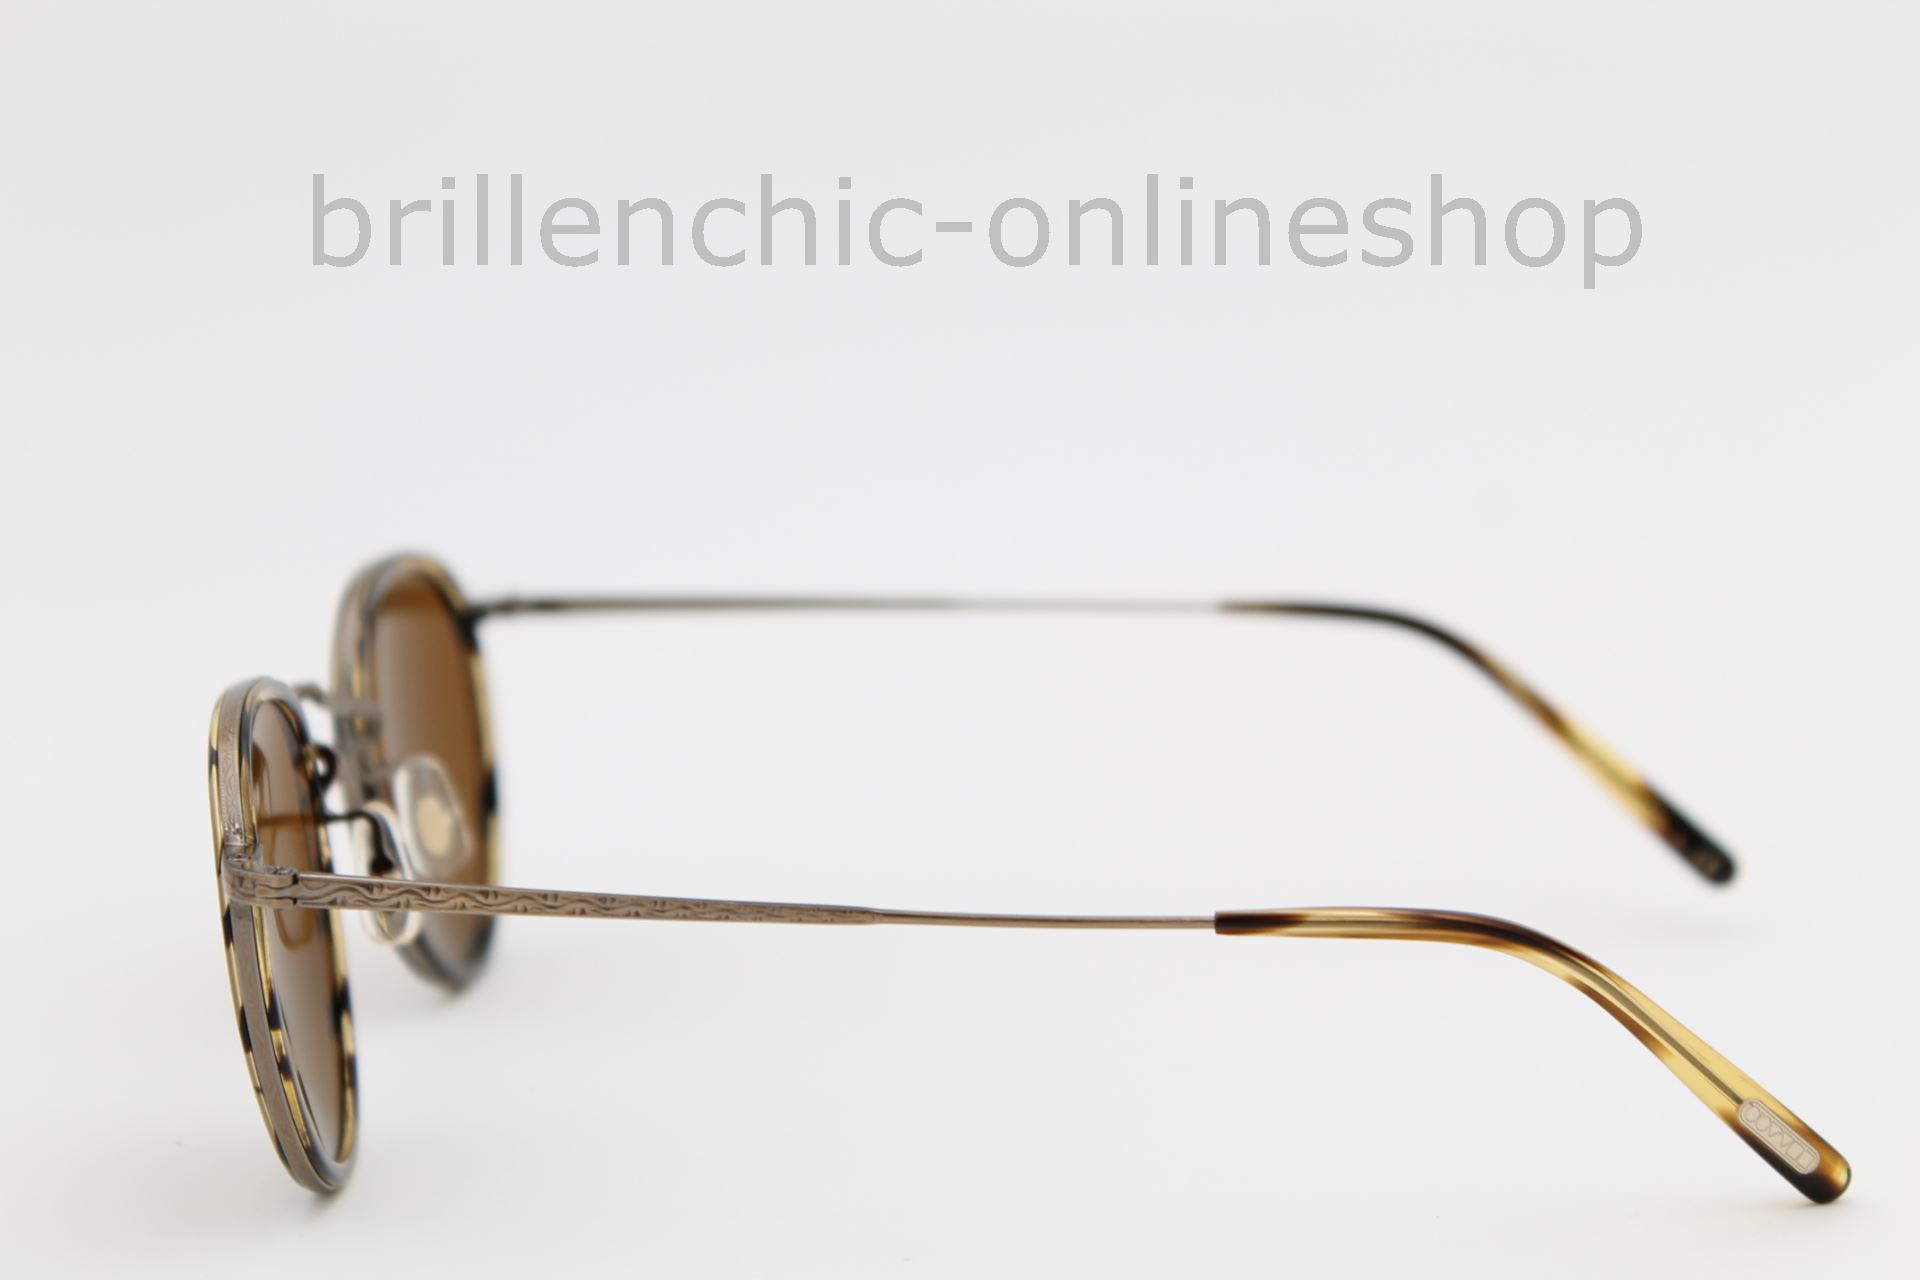 Brillenchic Onlineshop In Berlin Oliver Peoples Mp 2 Sun Ov 1104s 1104 5039 53 New